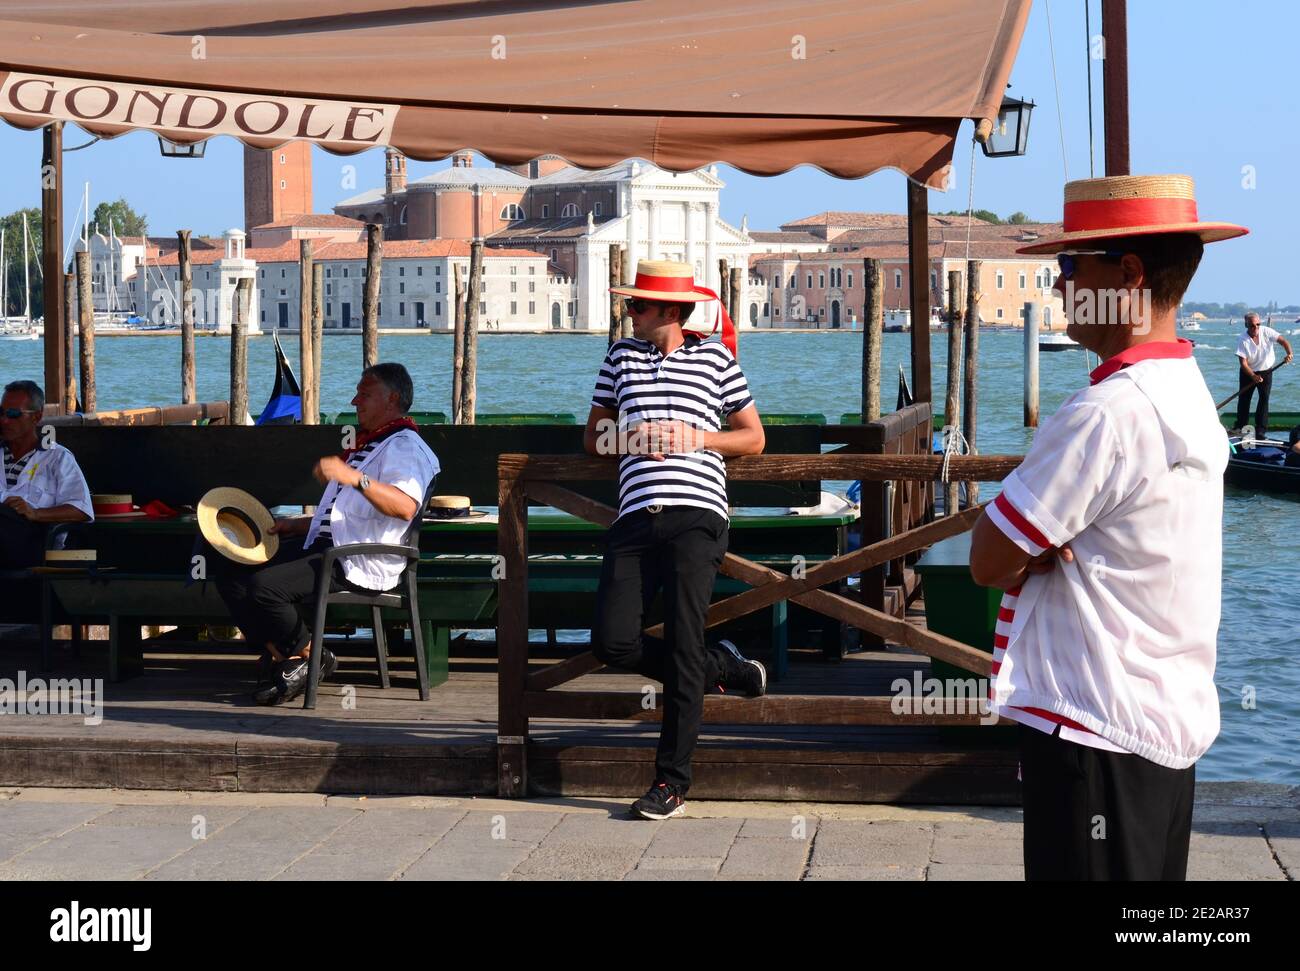 Gondoliers waiting for clients. Empty Venice, Italy Stock Photo